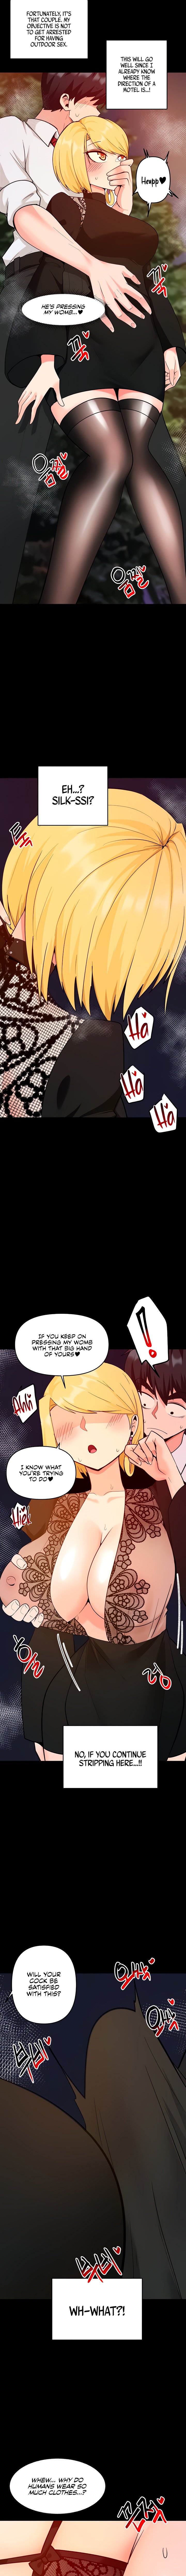 the-hypnosis-app-was-fake-chap-41-7